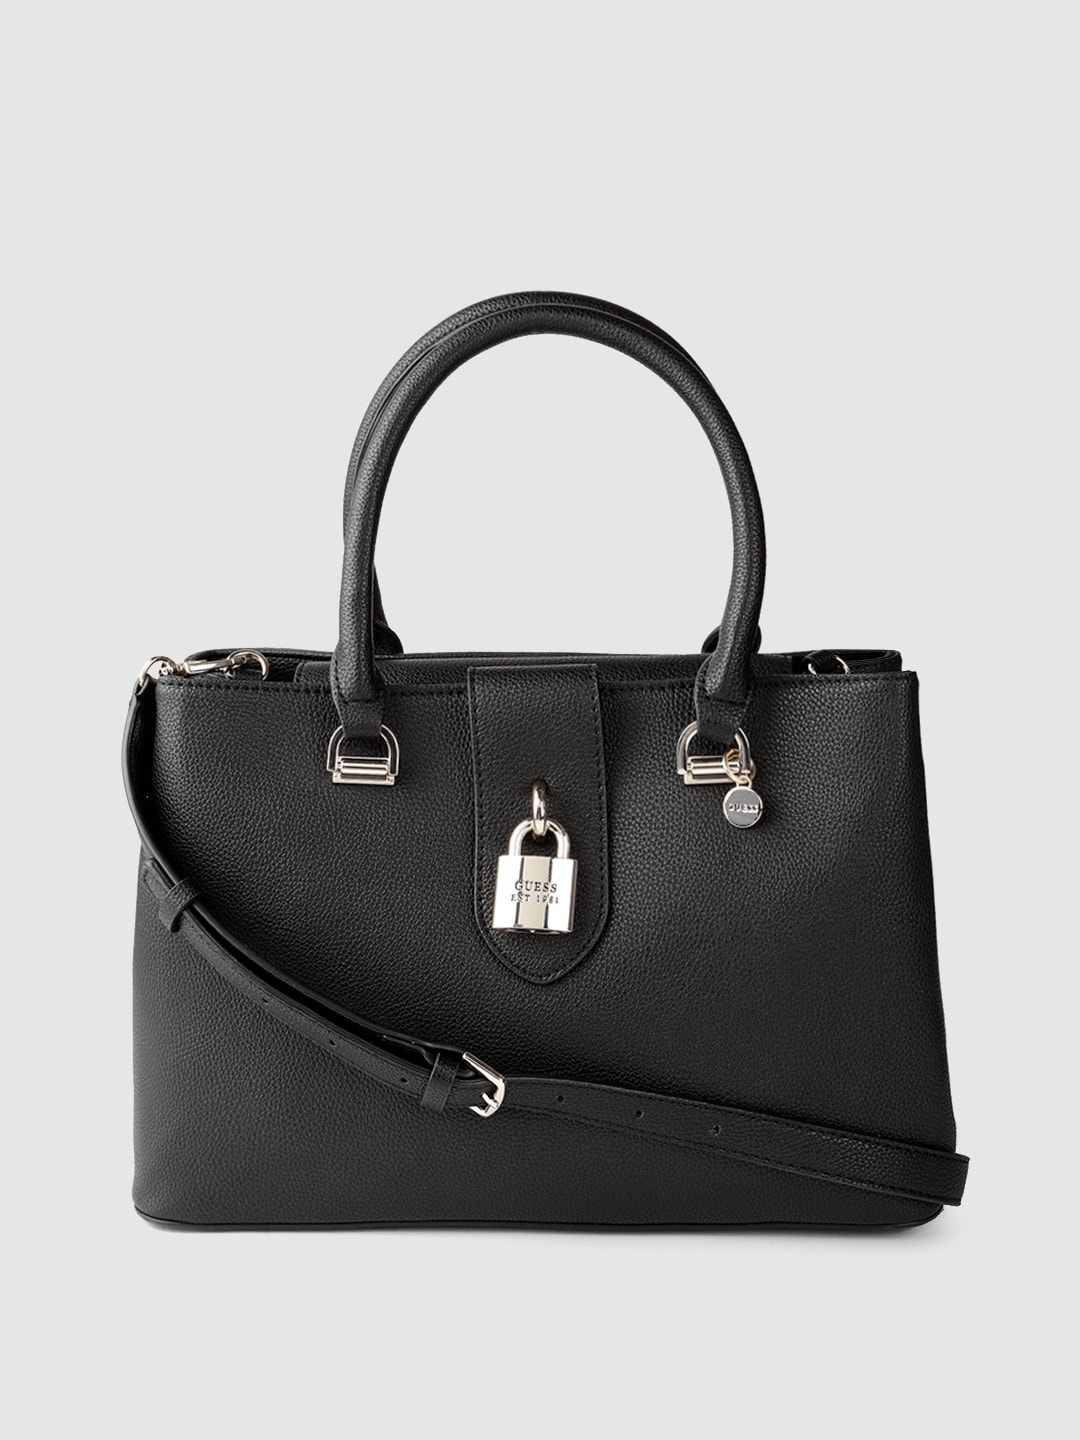 GUESS Black Solid Structured Handheld Bag with Detachable Sling Strap & Pouch Price in India